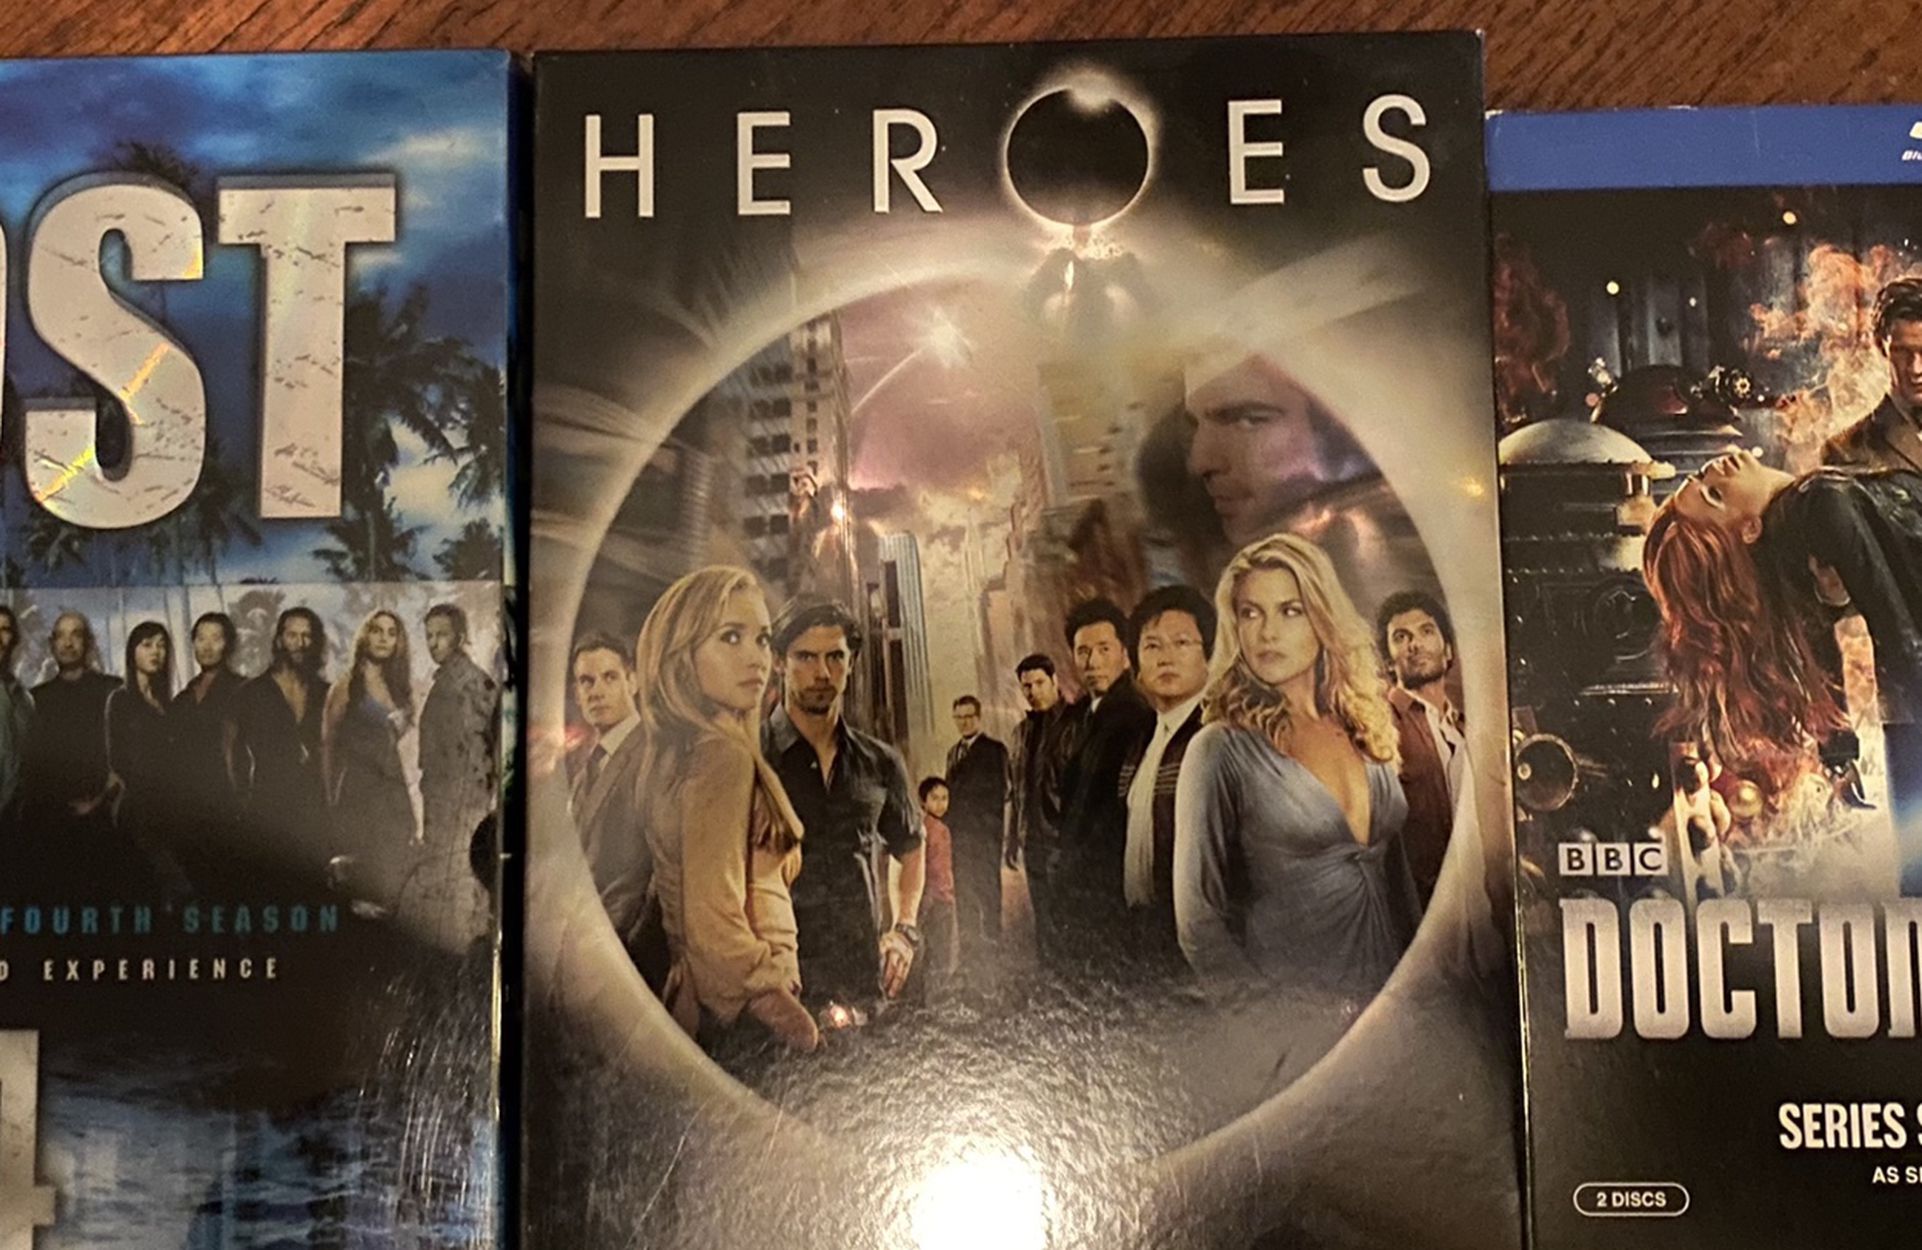 DVD/Blu-ray Lost, Heroes, Doctor Who